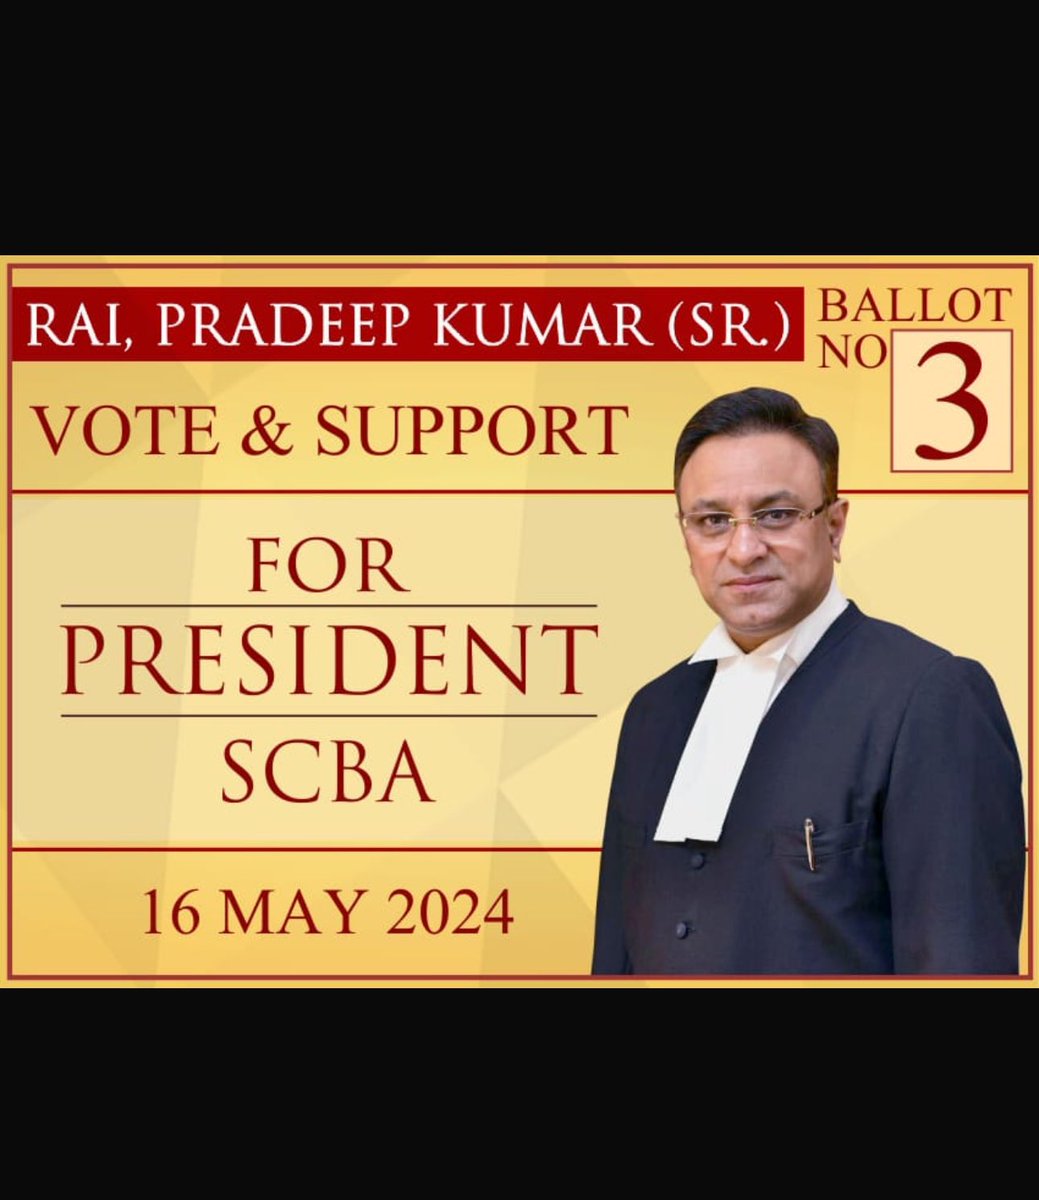 To defeat the secular forces in the supreme court it is my vote appeal to all scba members to vote and support Shri Pradeep Rai ji for the post for president of scba in the upcoming elections on 16th may,2024